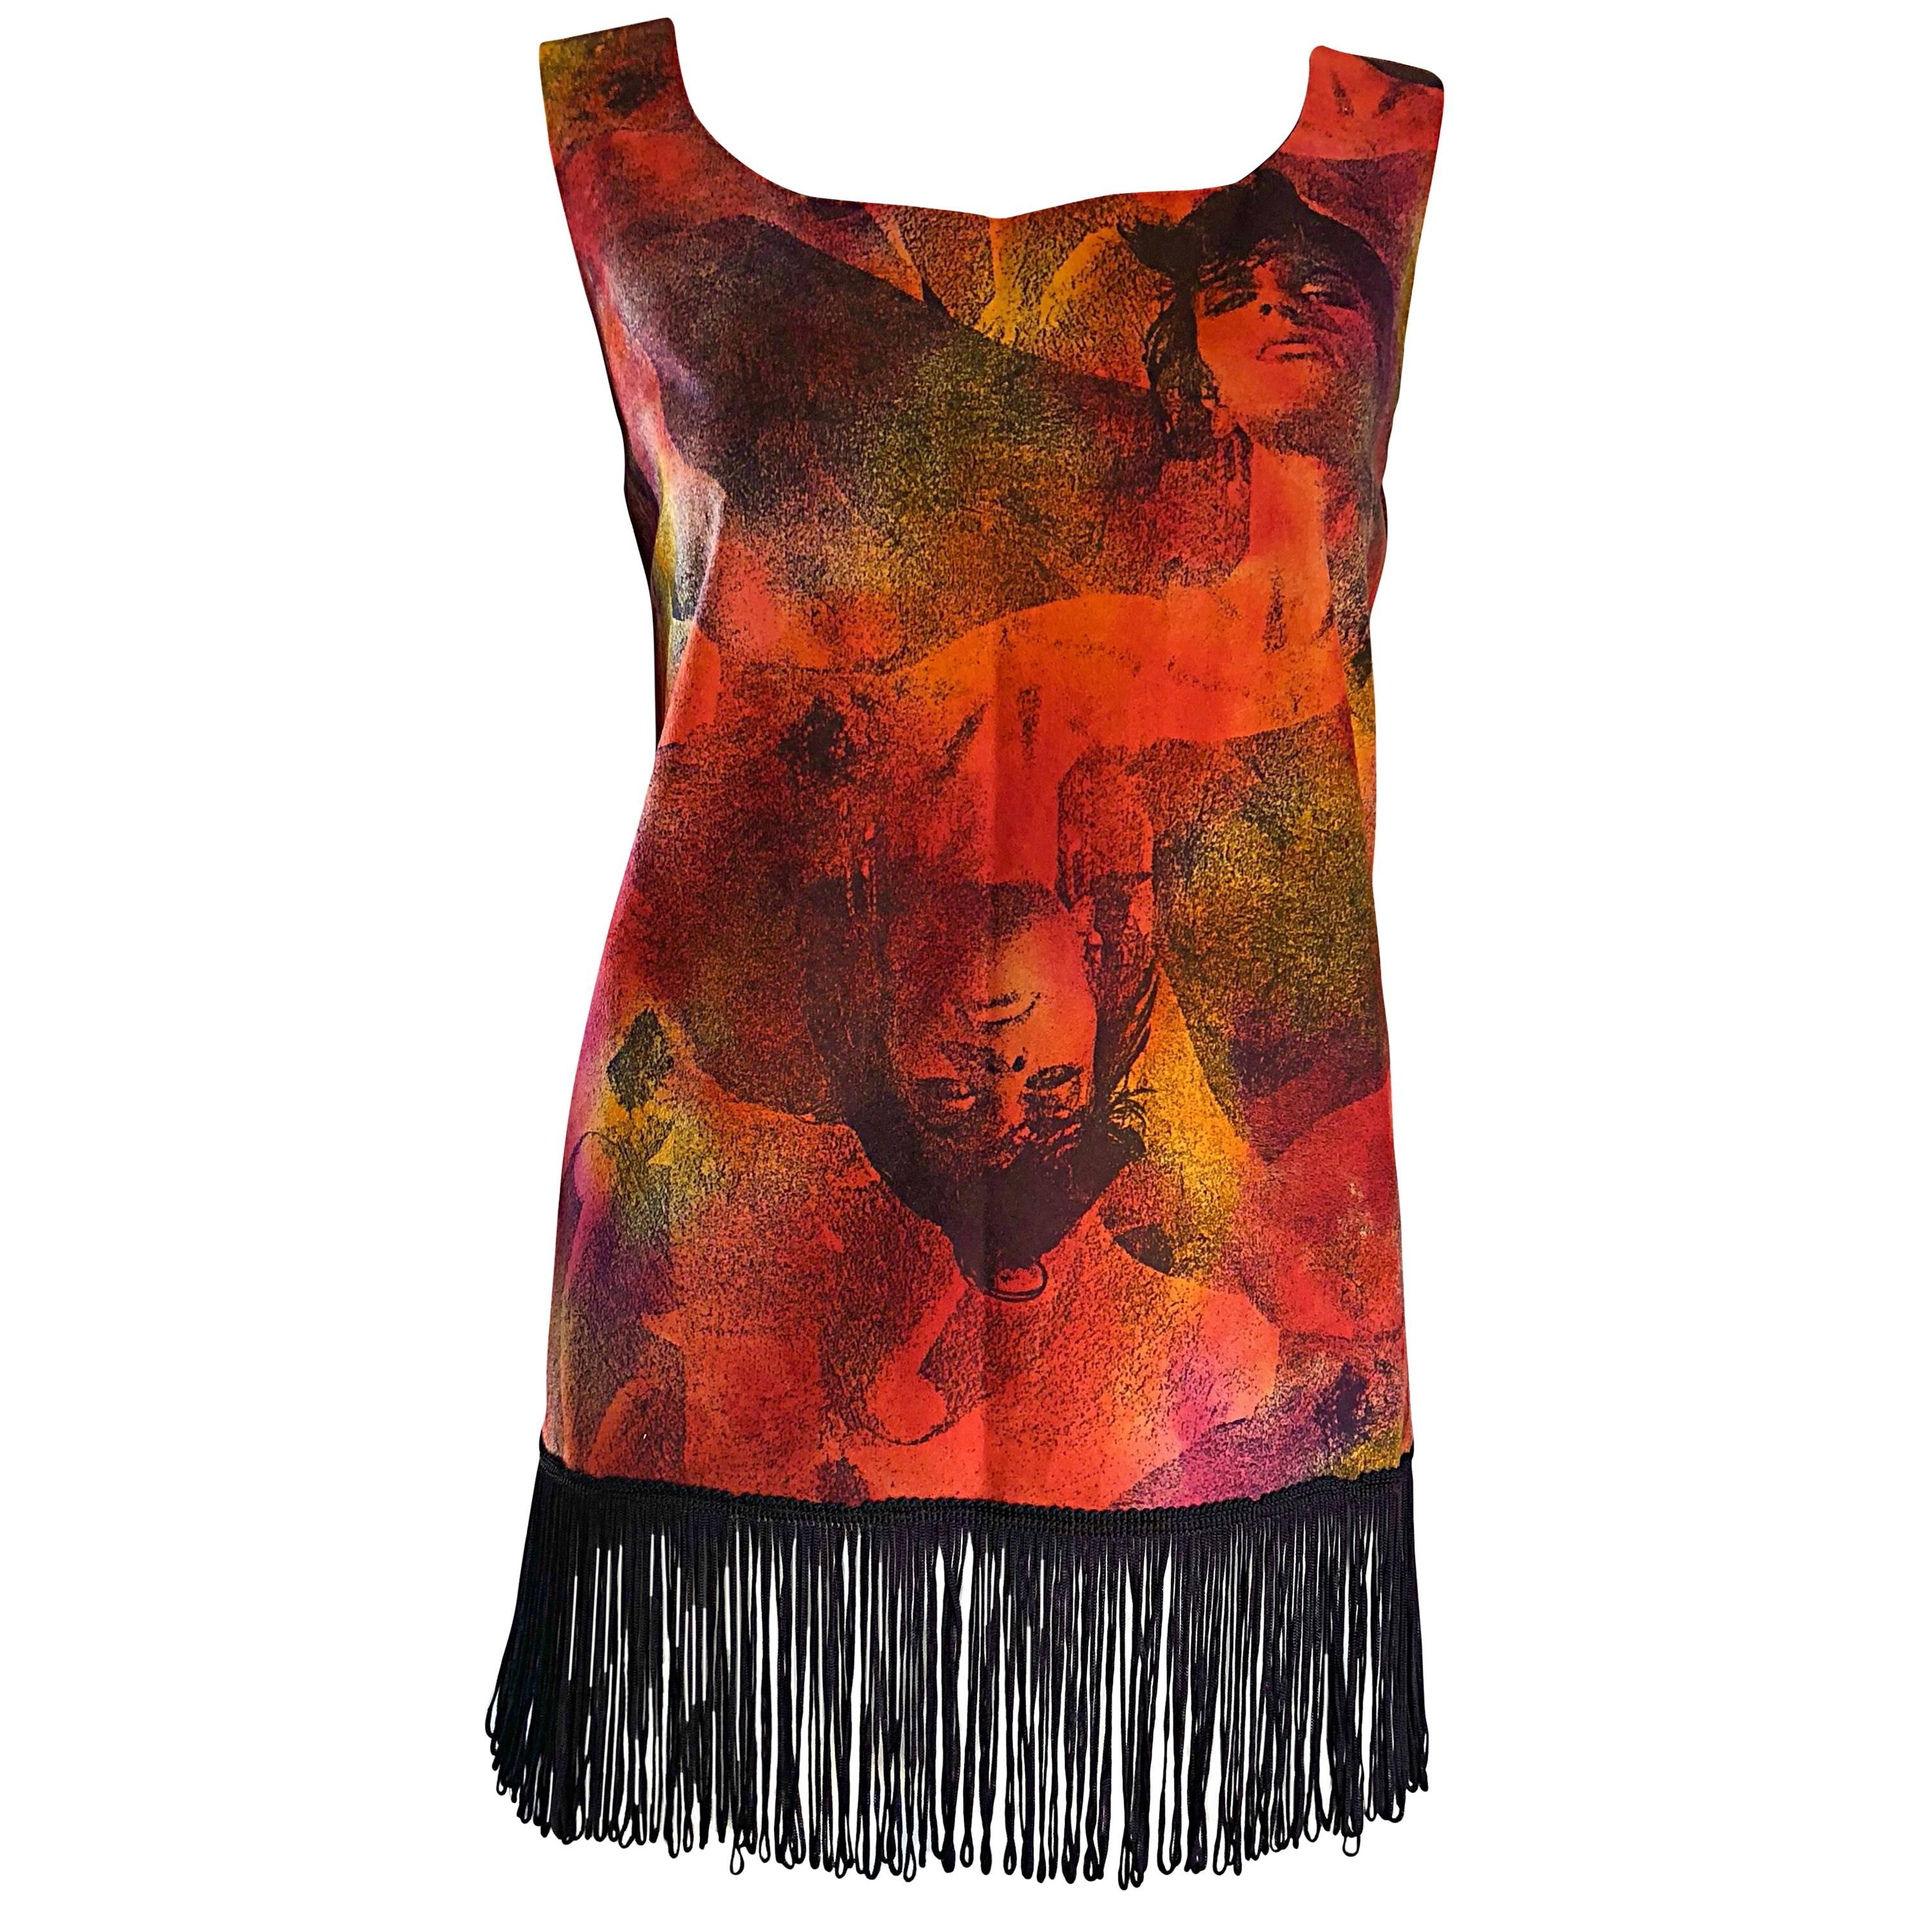 Rare 1990s Ordinary or Death Ultra Suede Avant Garde Face Print Fringe 90s Top For Sale